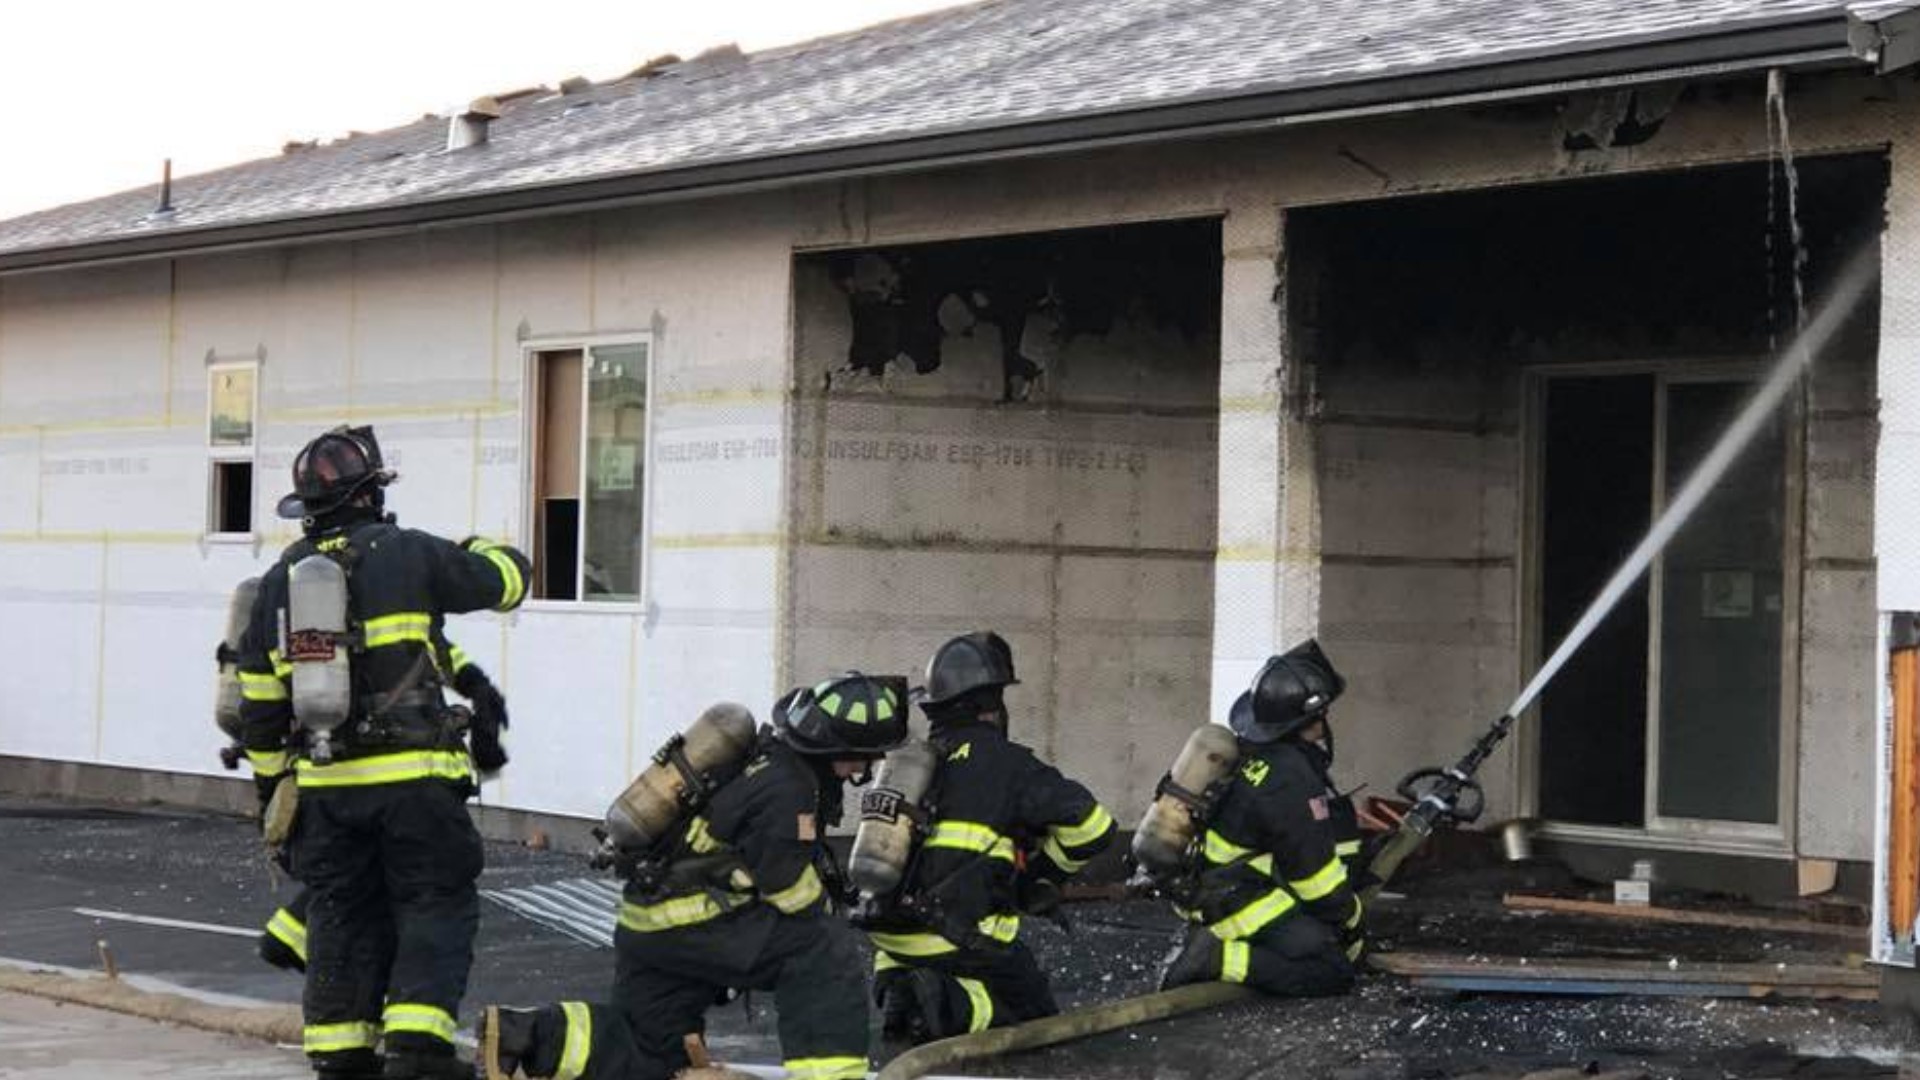 Several houses were destroyed early Thursday when a fire broke out in a new subdivision that was under construction in Manteca. Fire investigators are calling the blaze suspicious.